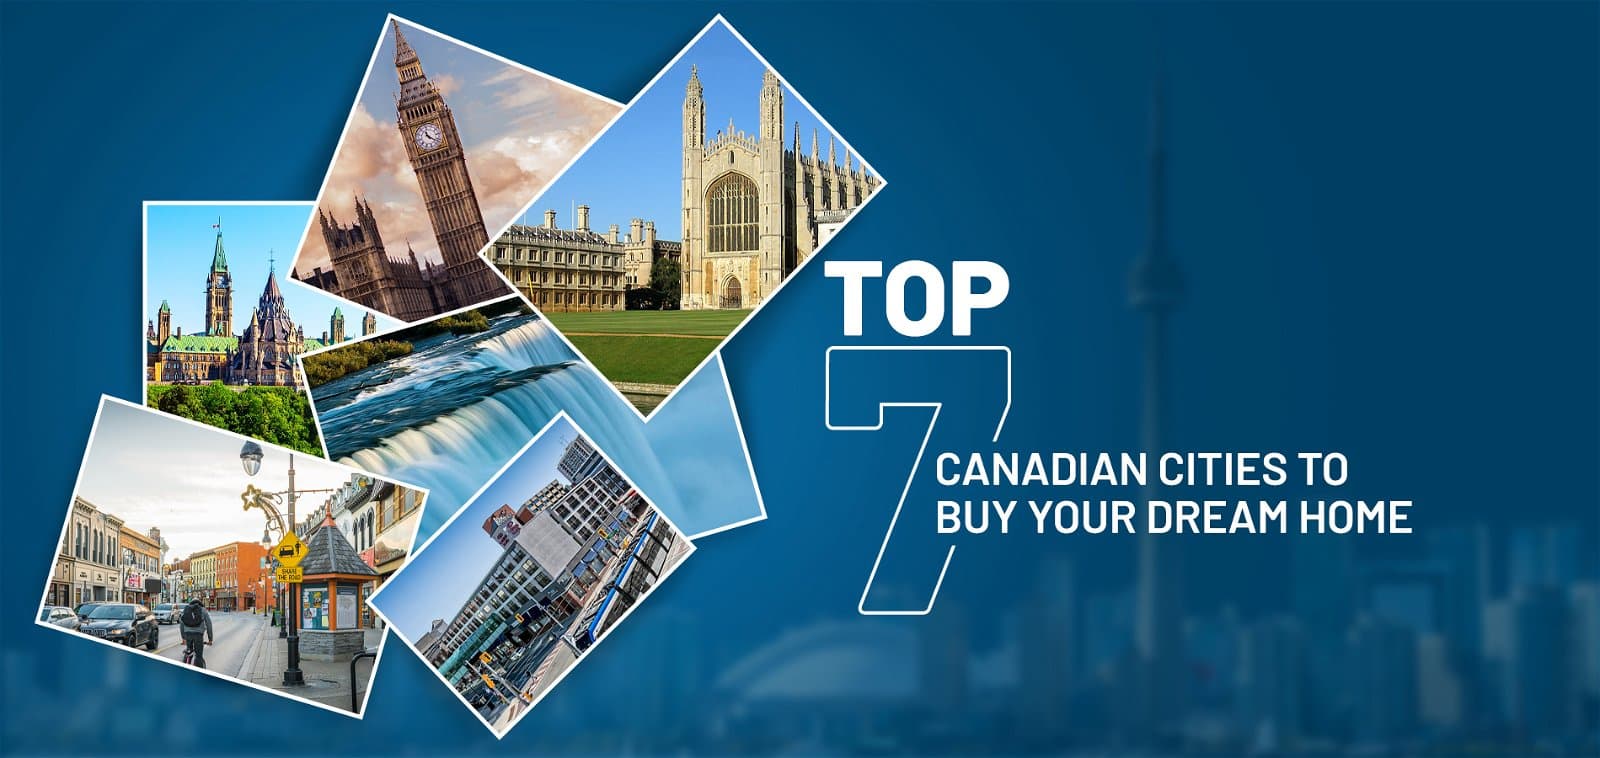 Top 7 Canadian Cities To Buy Your Dream Home